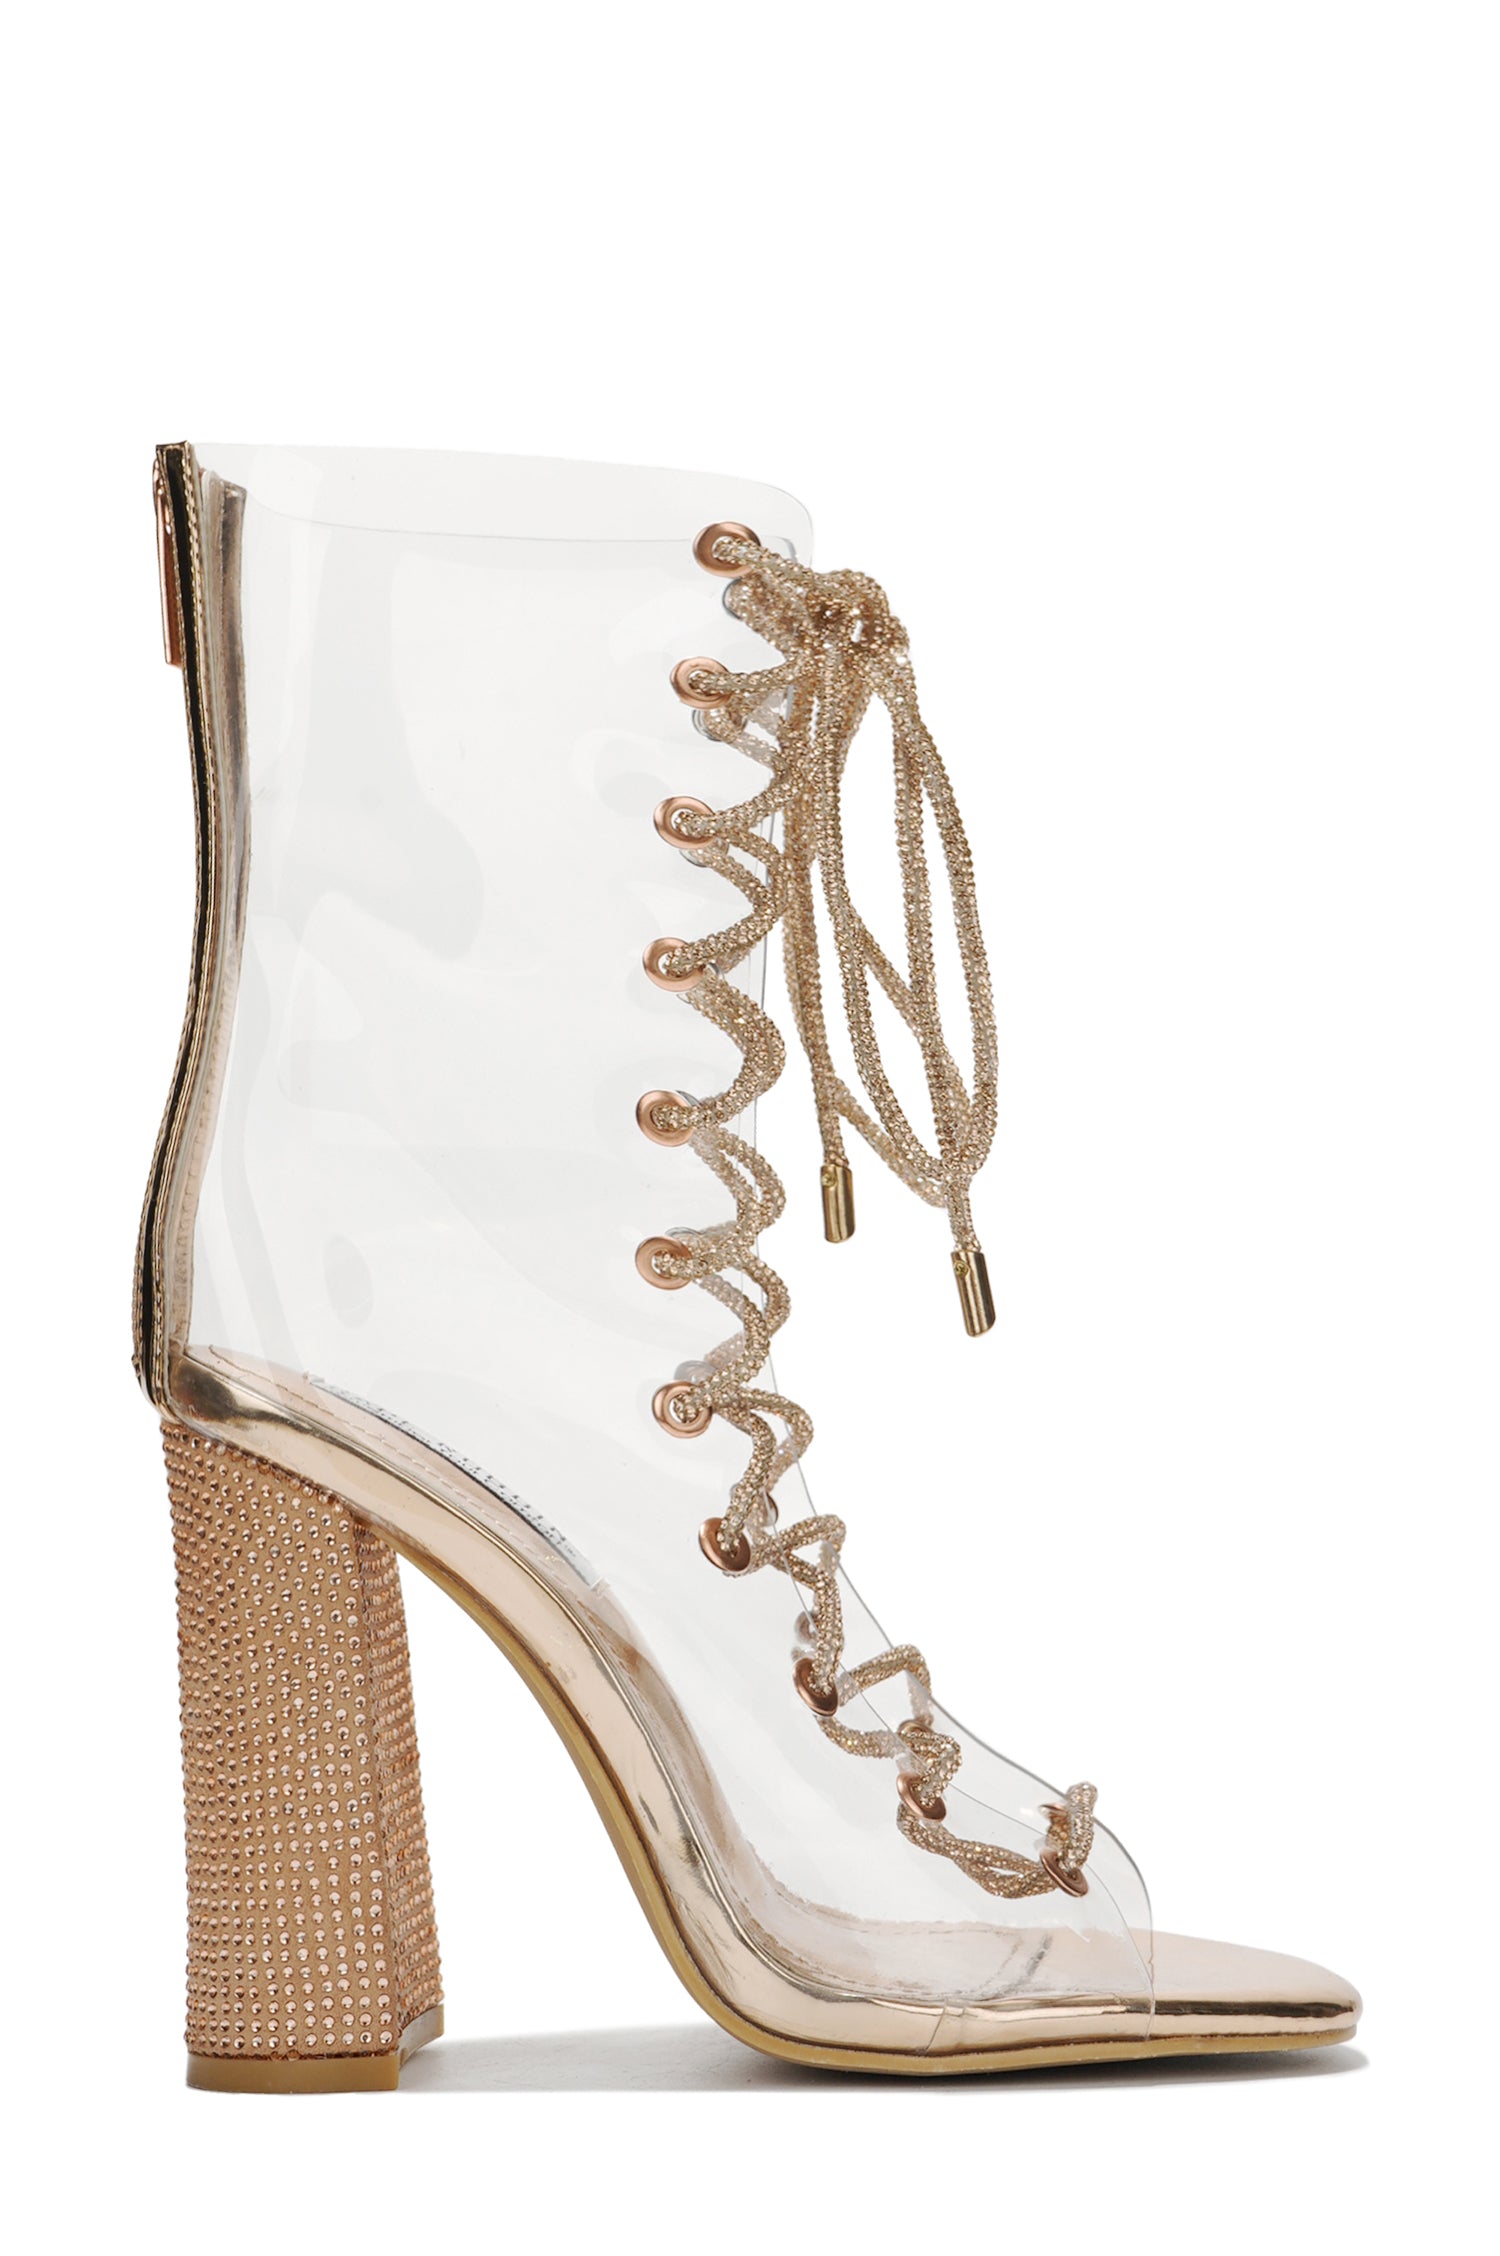 Cape Robbin - LOOKEY - ROSE GOLD - BOOTIES